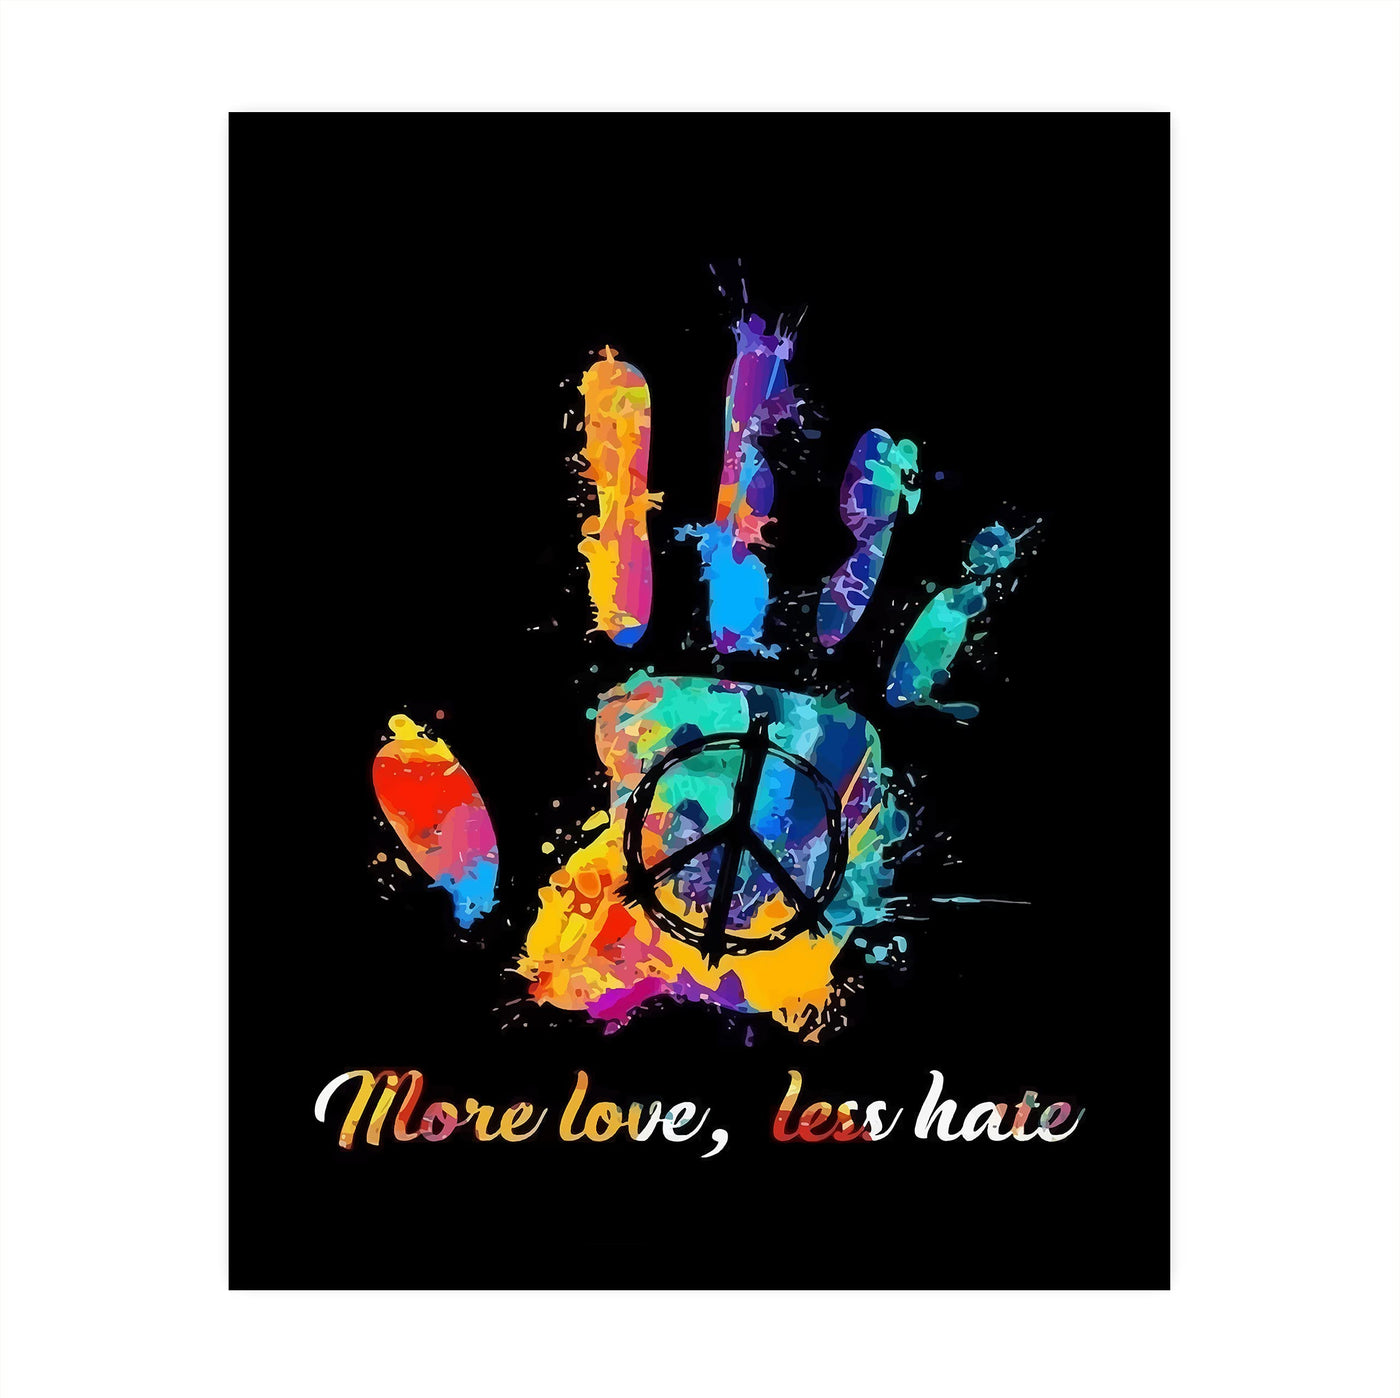 More Love, Less Hate Inspirational Quotes Wall Art -10 x 8" Abstract Painting Design Hand Print w/Peace Sign- Ready to Frame. Retro Decor for Home-Office-Studio-Dorm-Zen Decor. Great Reminder!